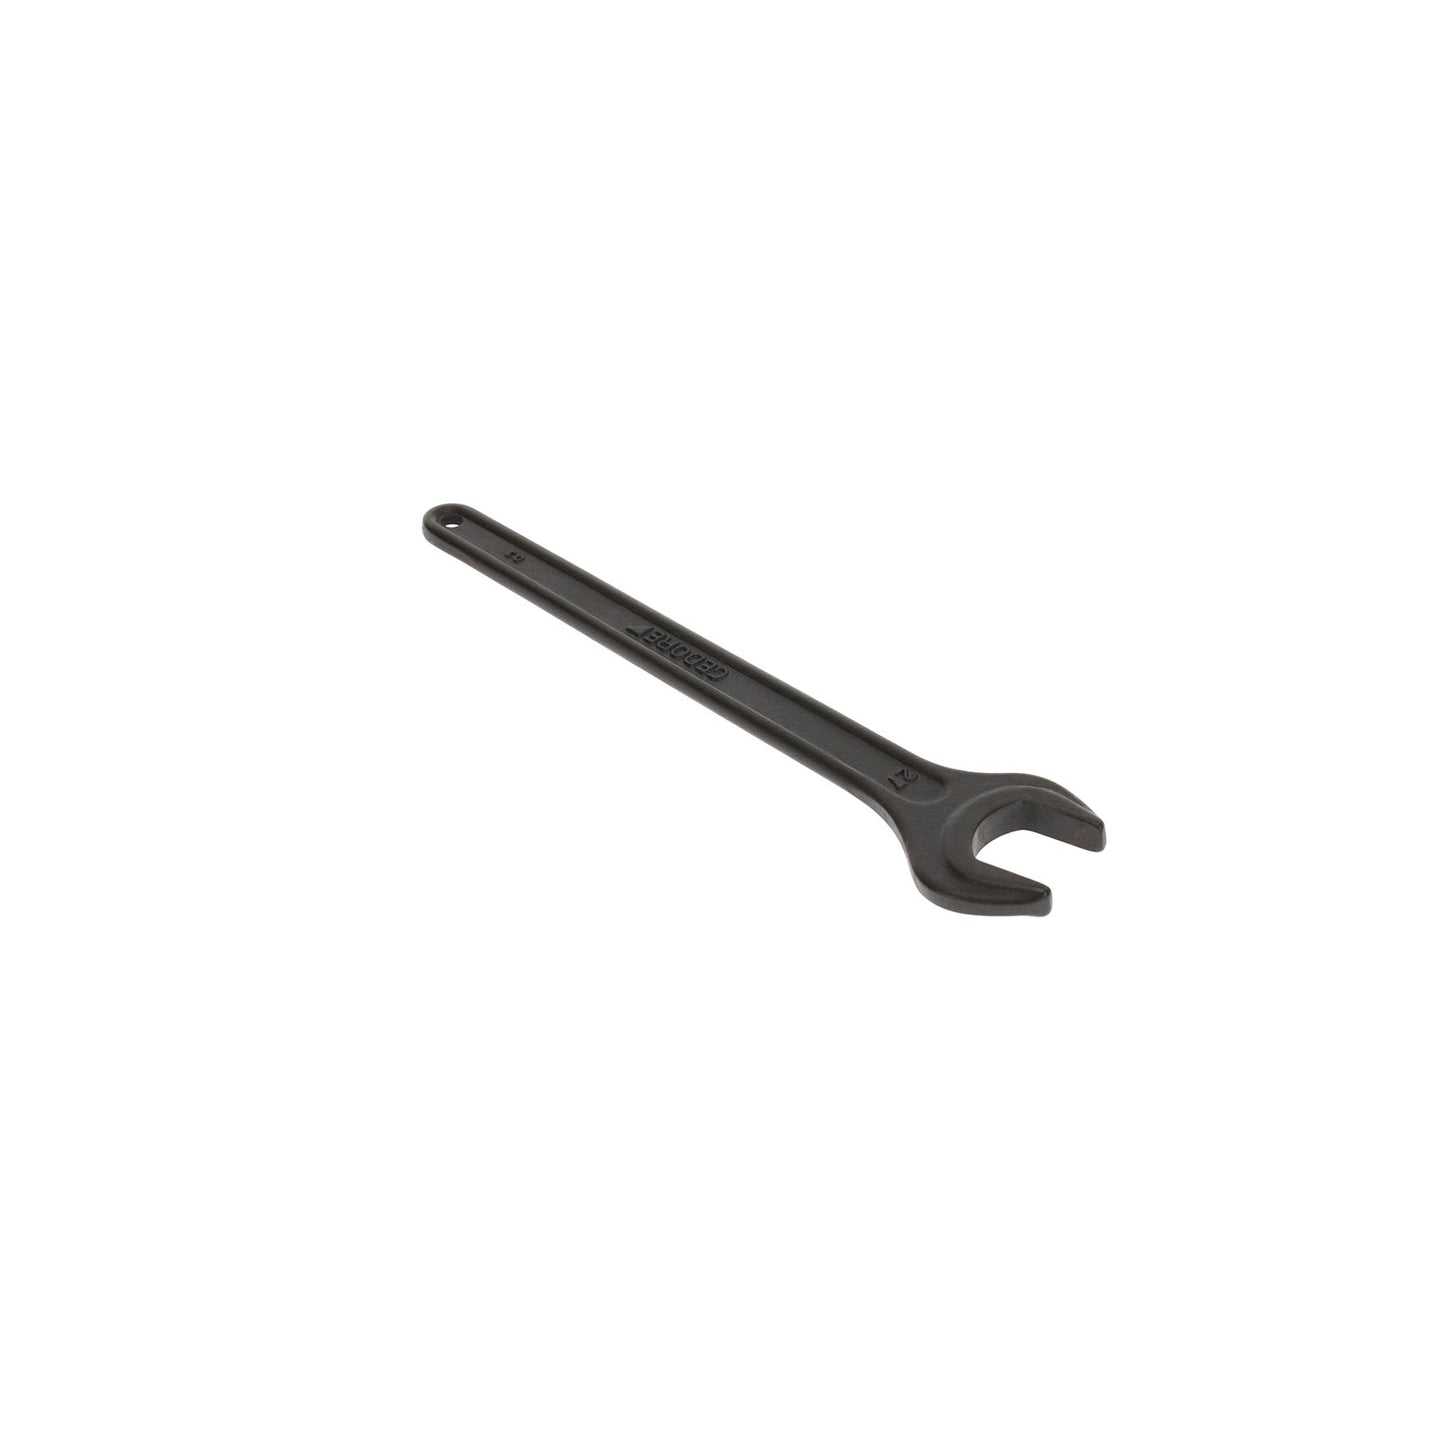 GEDORE 894 27 - 1 Open End Wrench, 27mm (6575810)